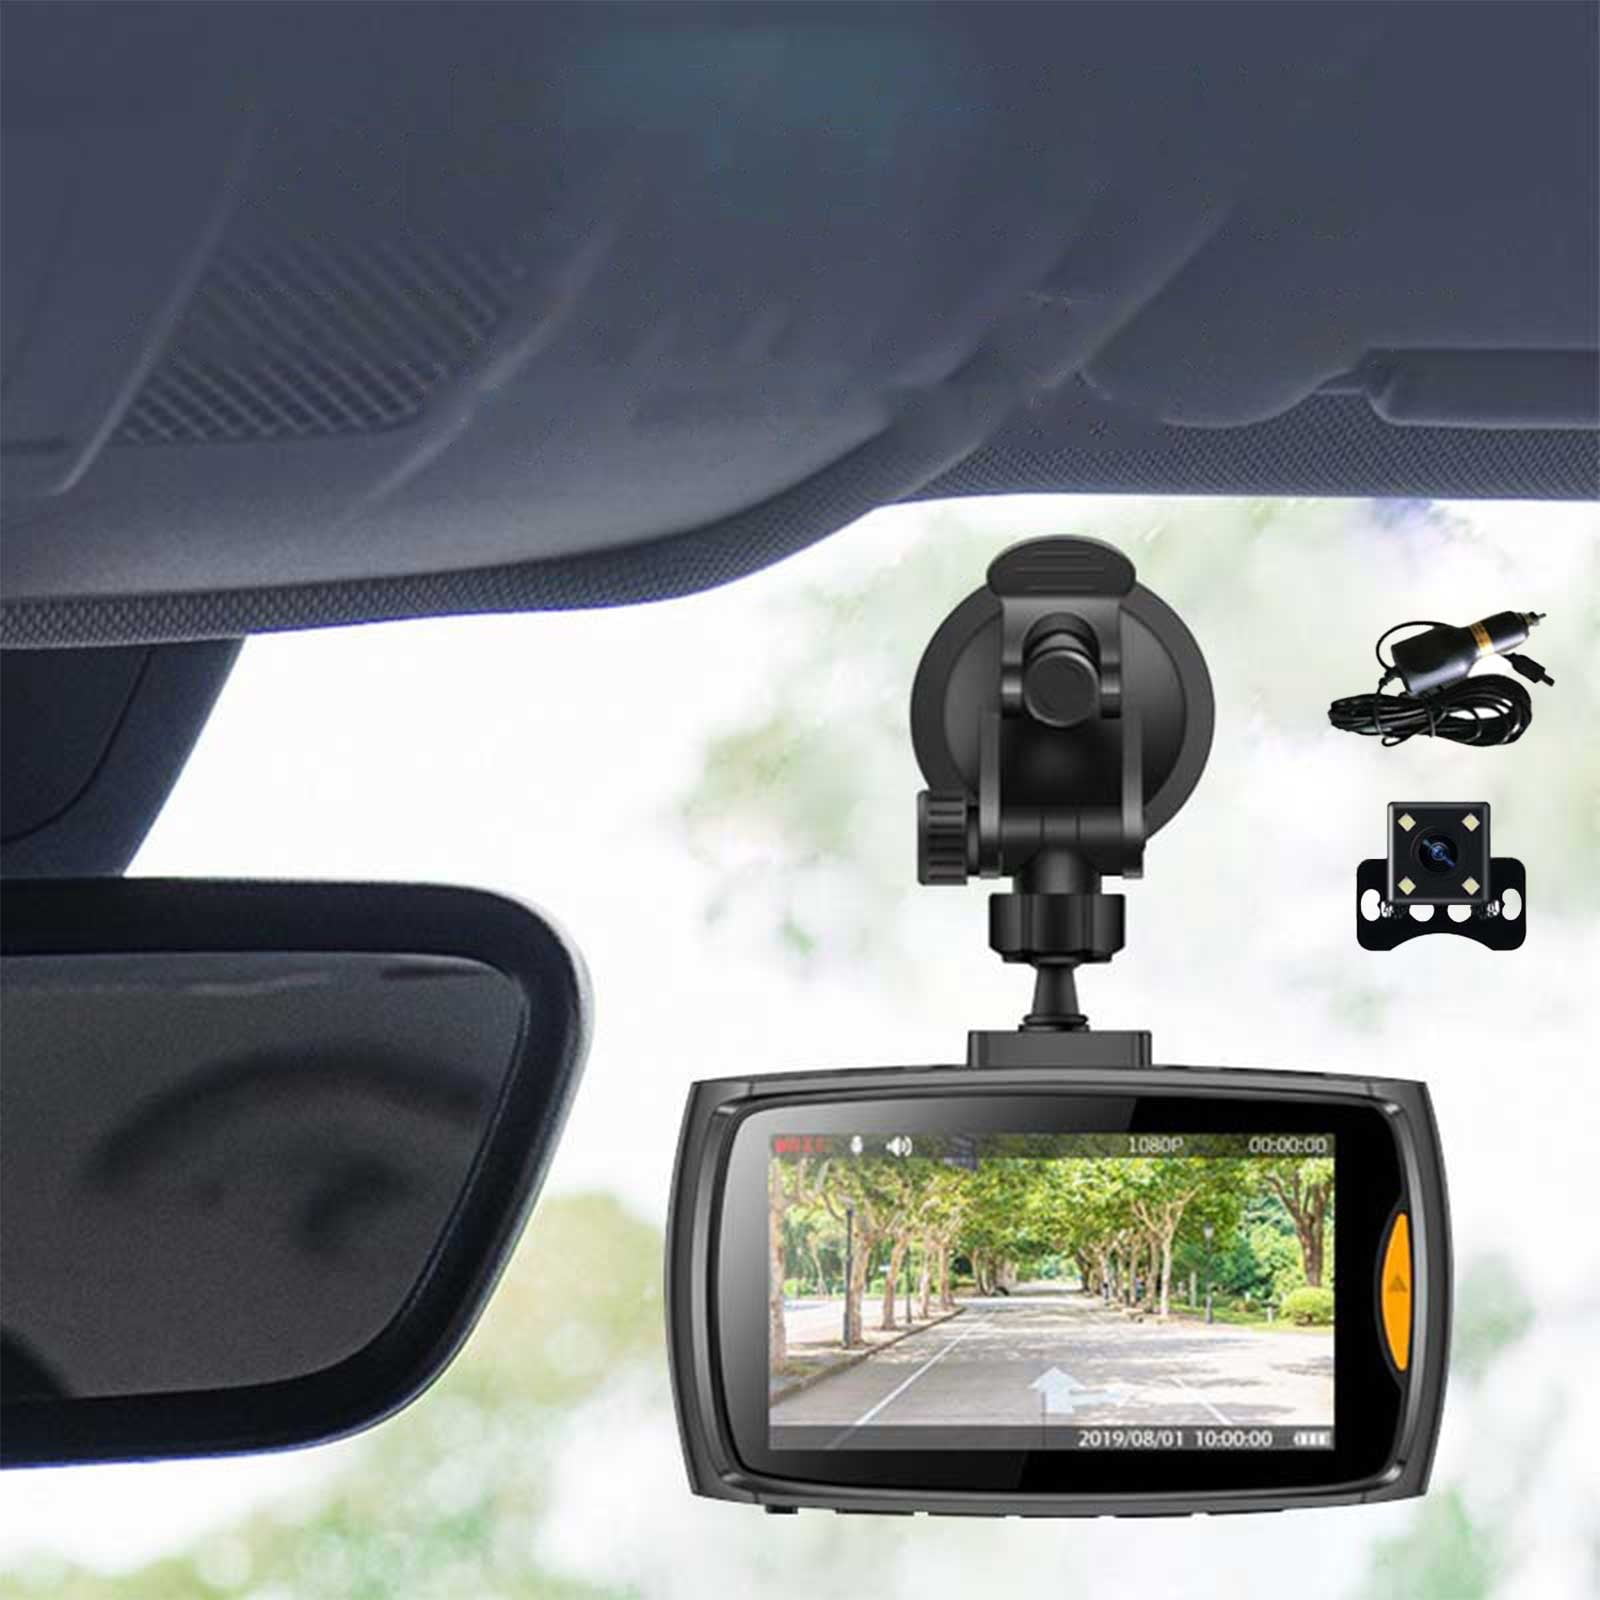 CAR AND DRIVER Eye 1 Pro HD Dash Cam with Loop Recording & Super  Nightvision CAD-CDC-632 - The Home Depot